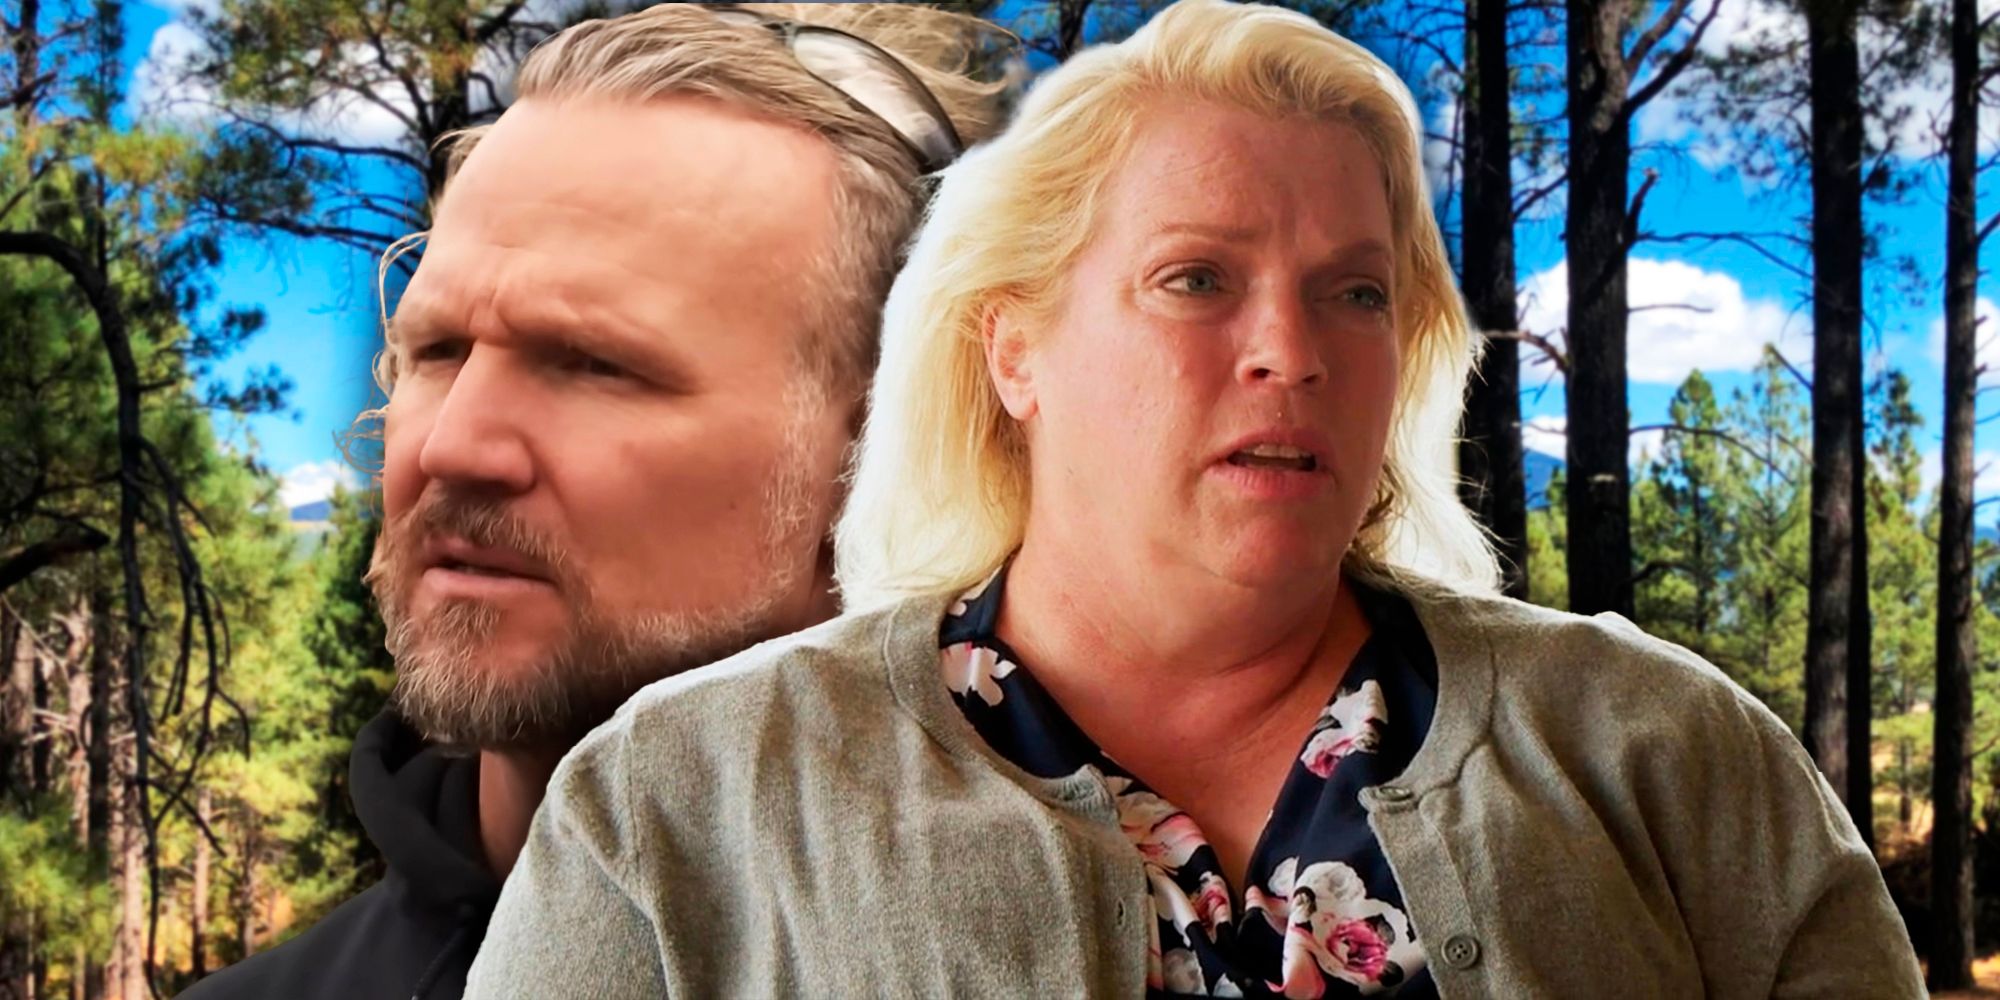 Kody and Janelle Brown from Sister Wives looking stressed with a forest background